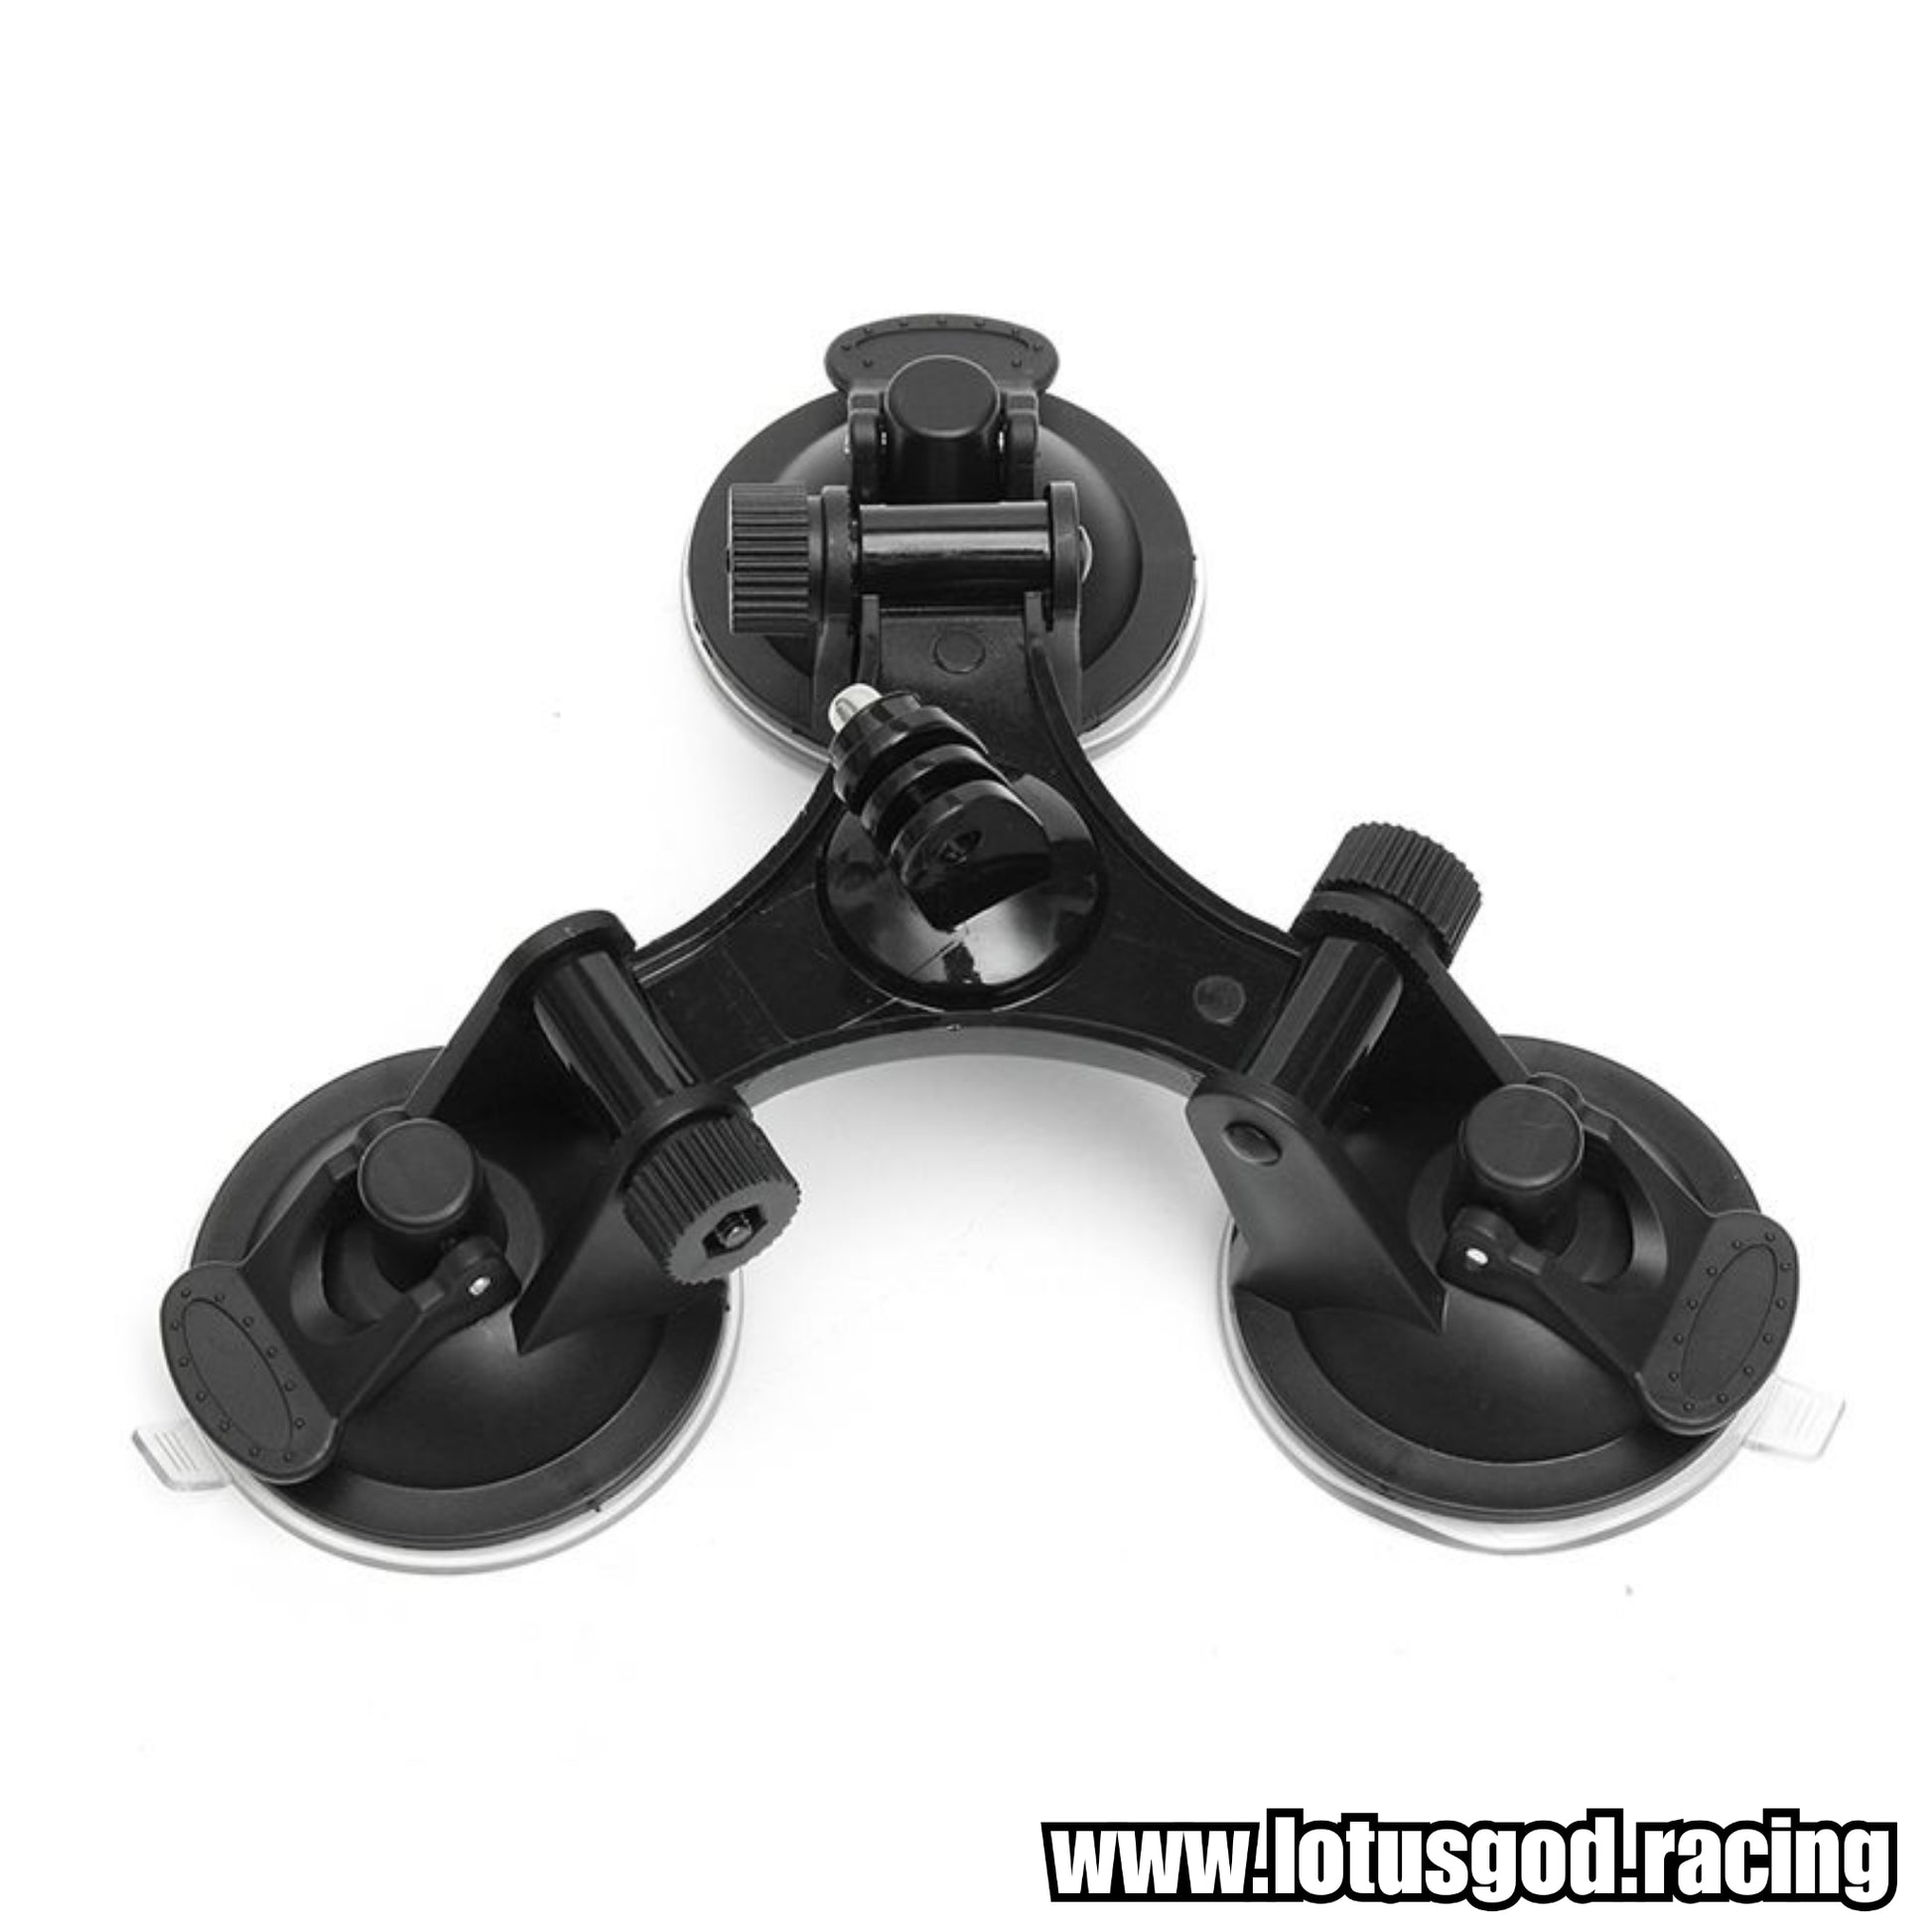 3 Suction Cup Mount for Gopro iPhone